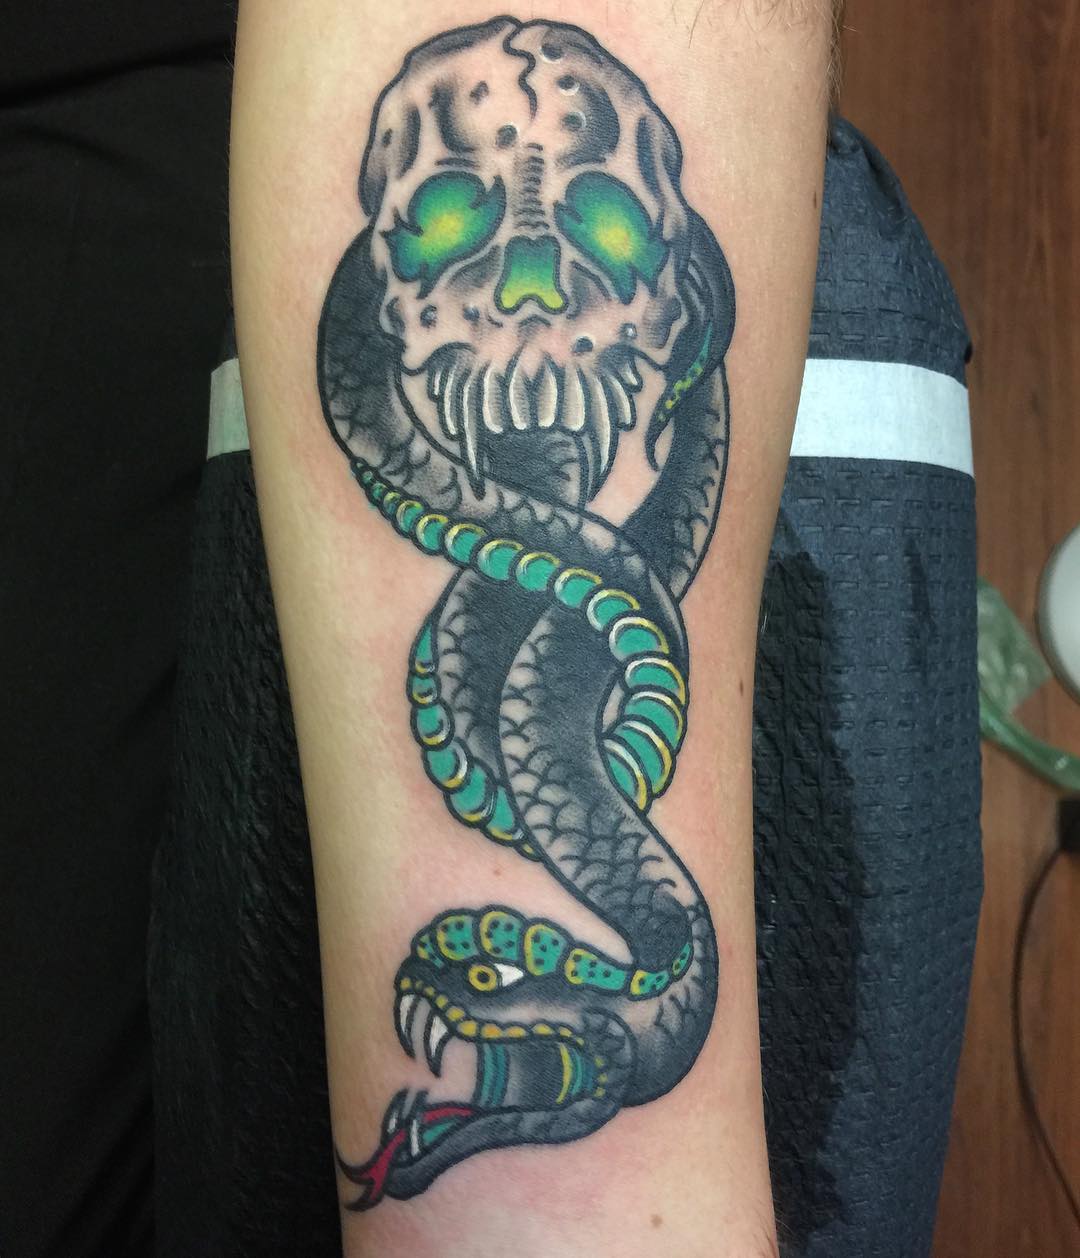 Are traditional tattoo lovers here? This death eater tattoo is for you since a traditional tattoo technique is used here. To feel the old vibes, this is the one you should go for.